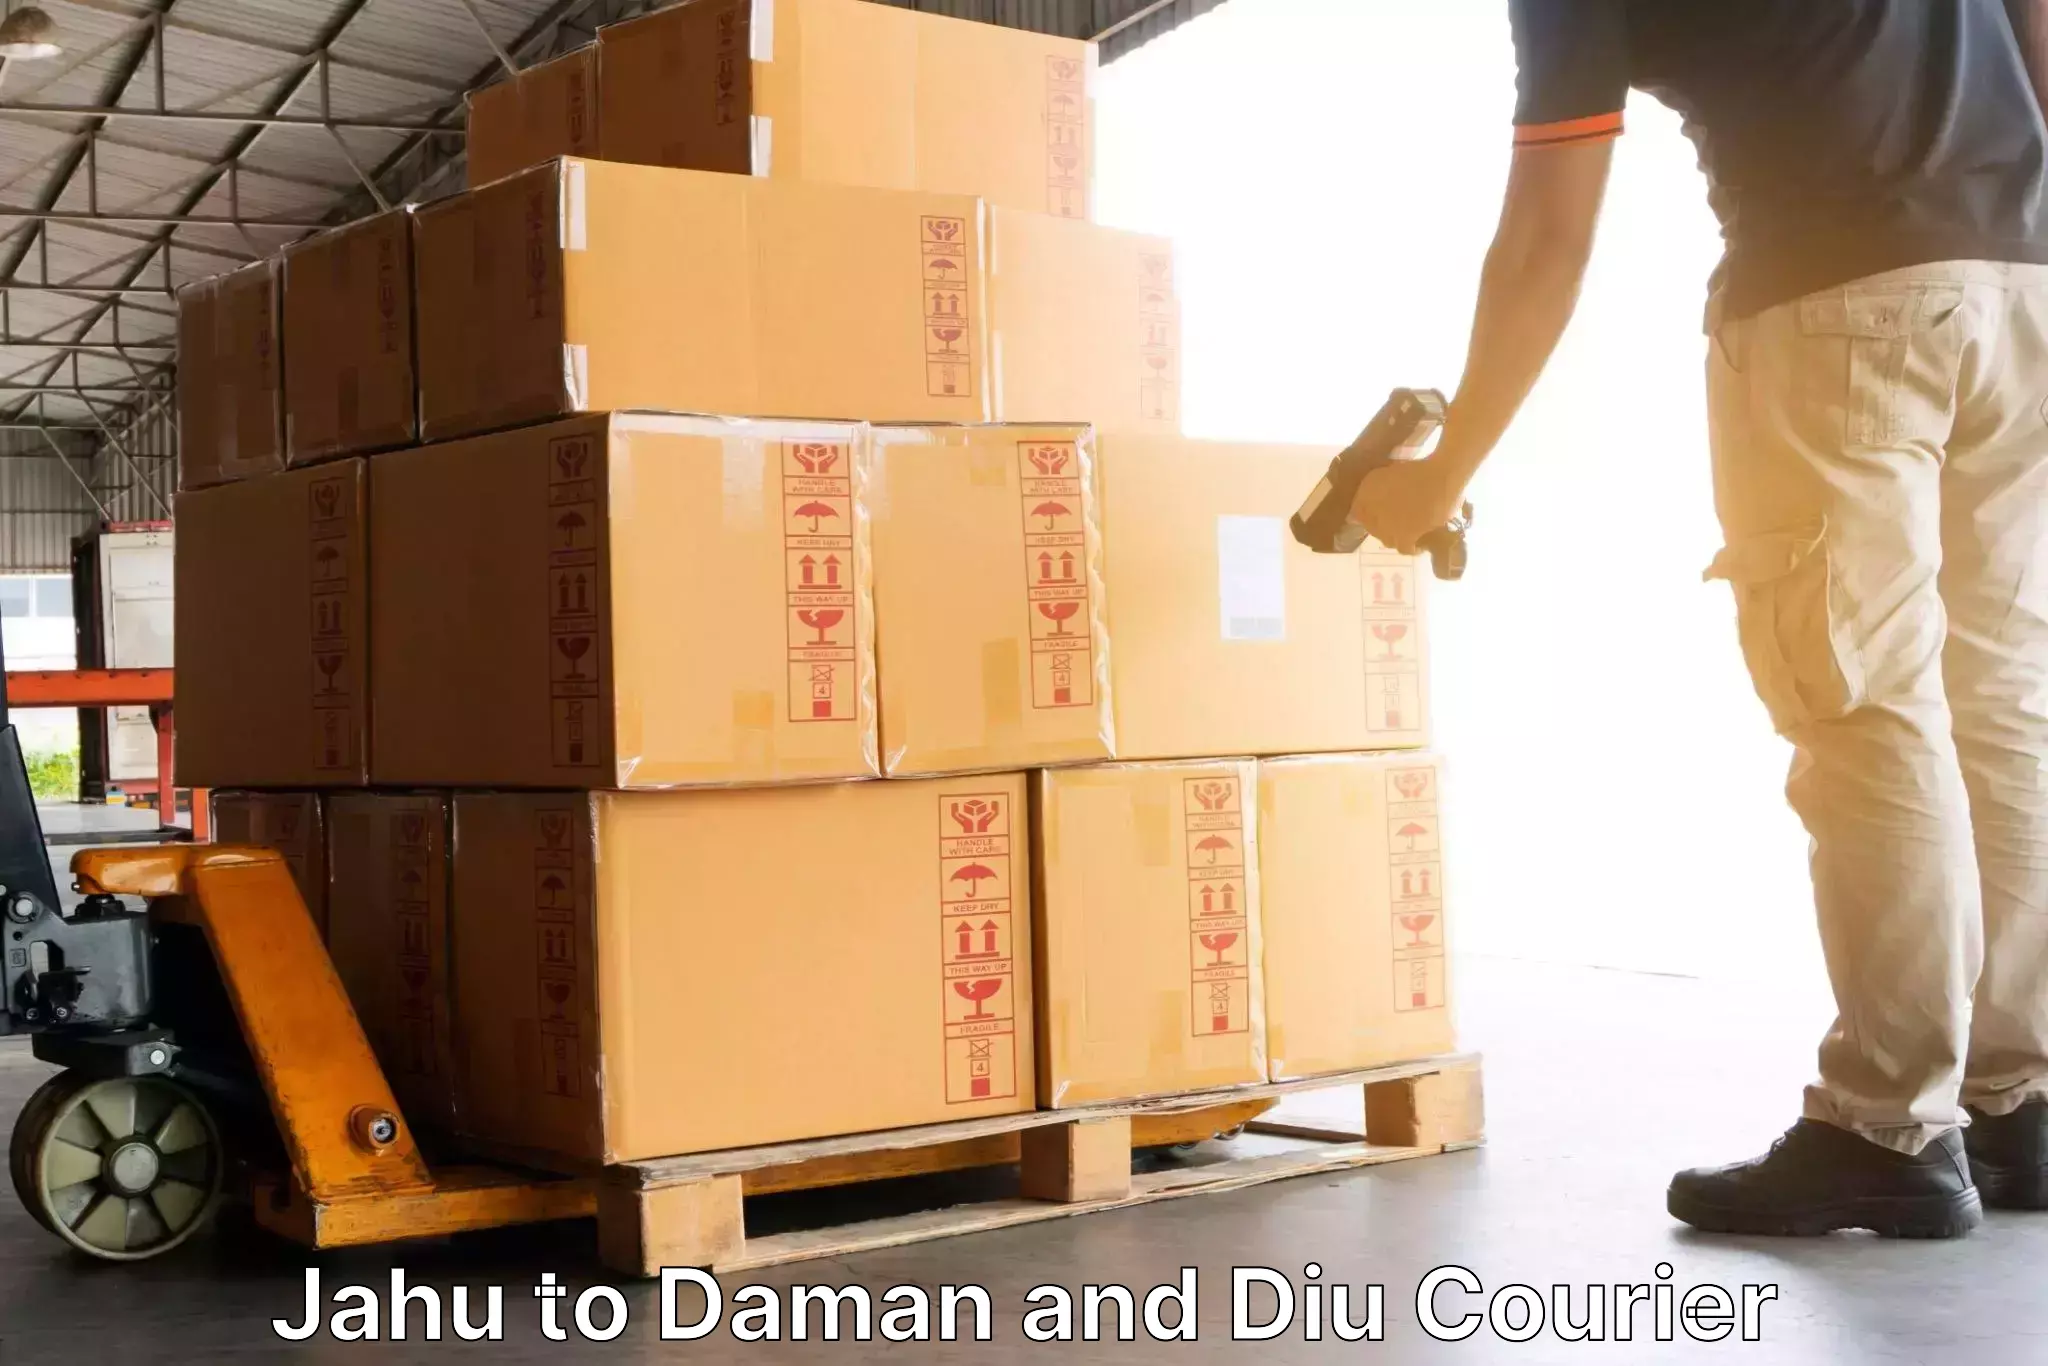 User-friendly delivery service Jahu to Daman